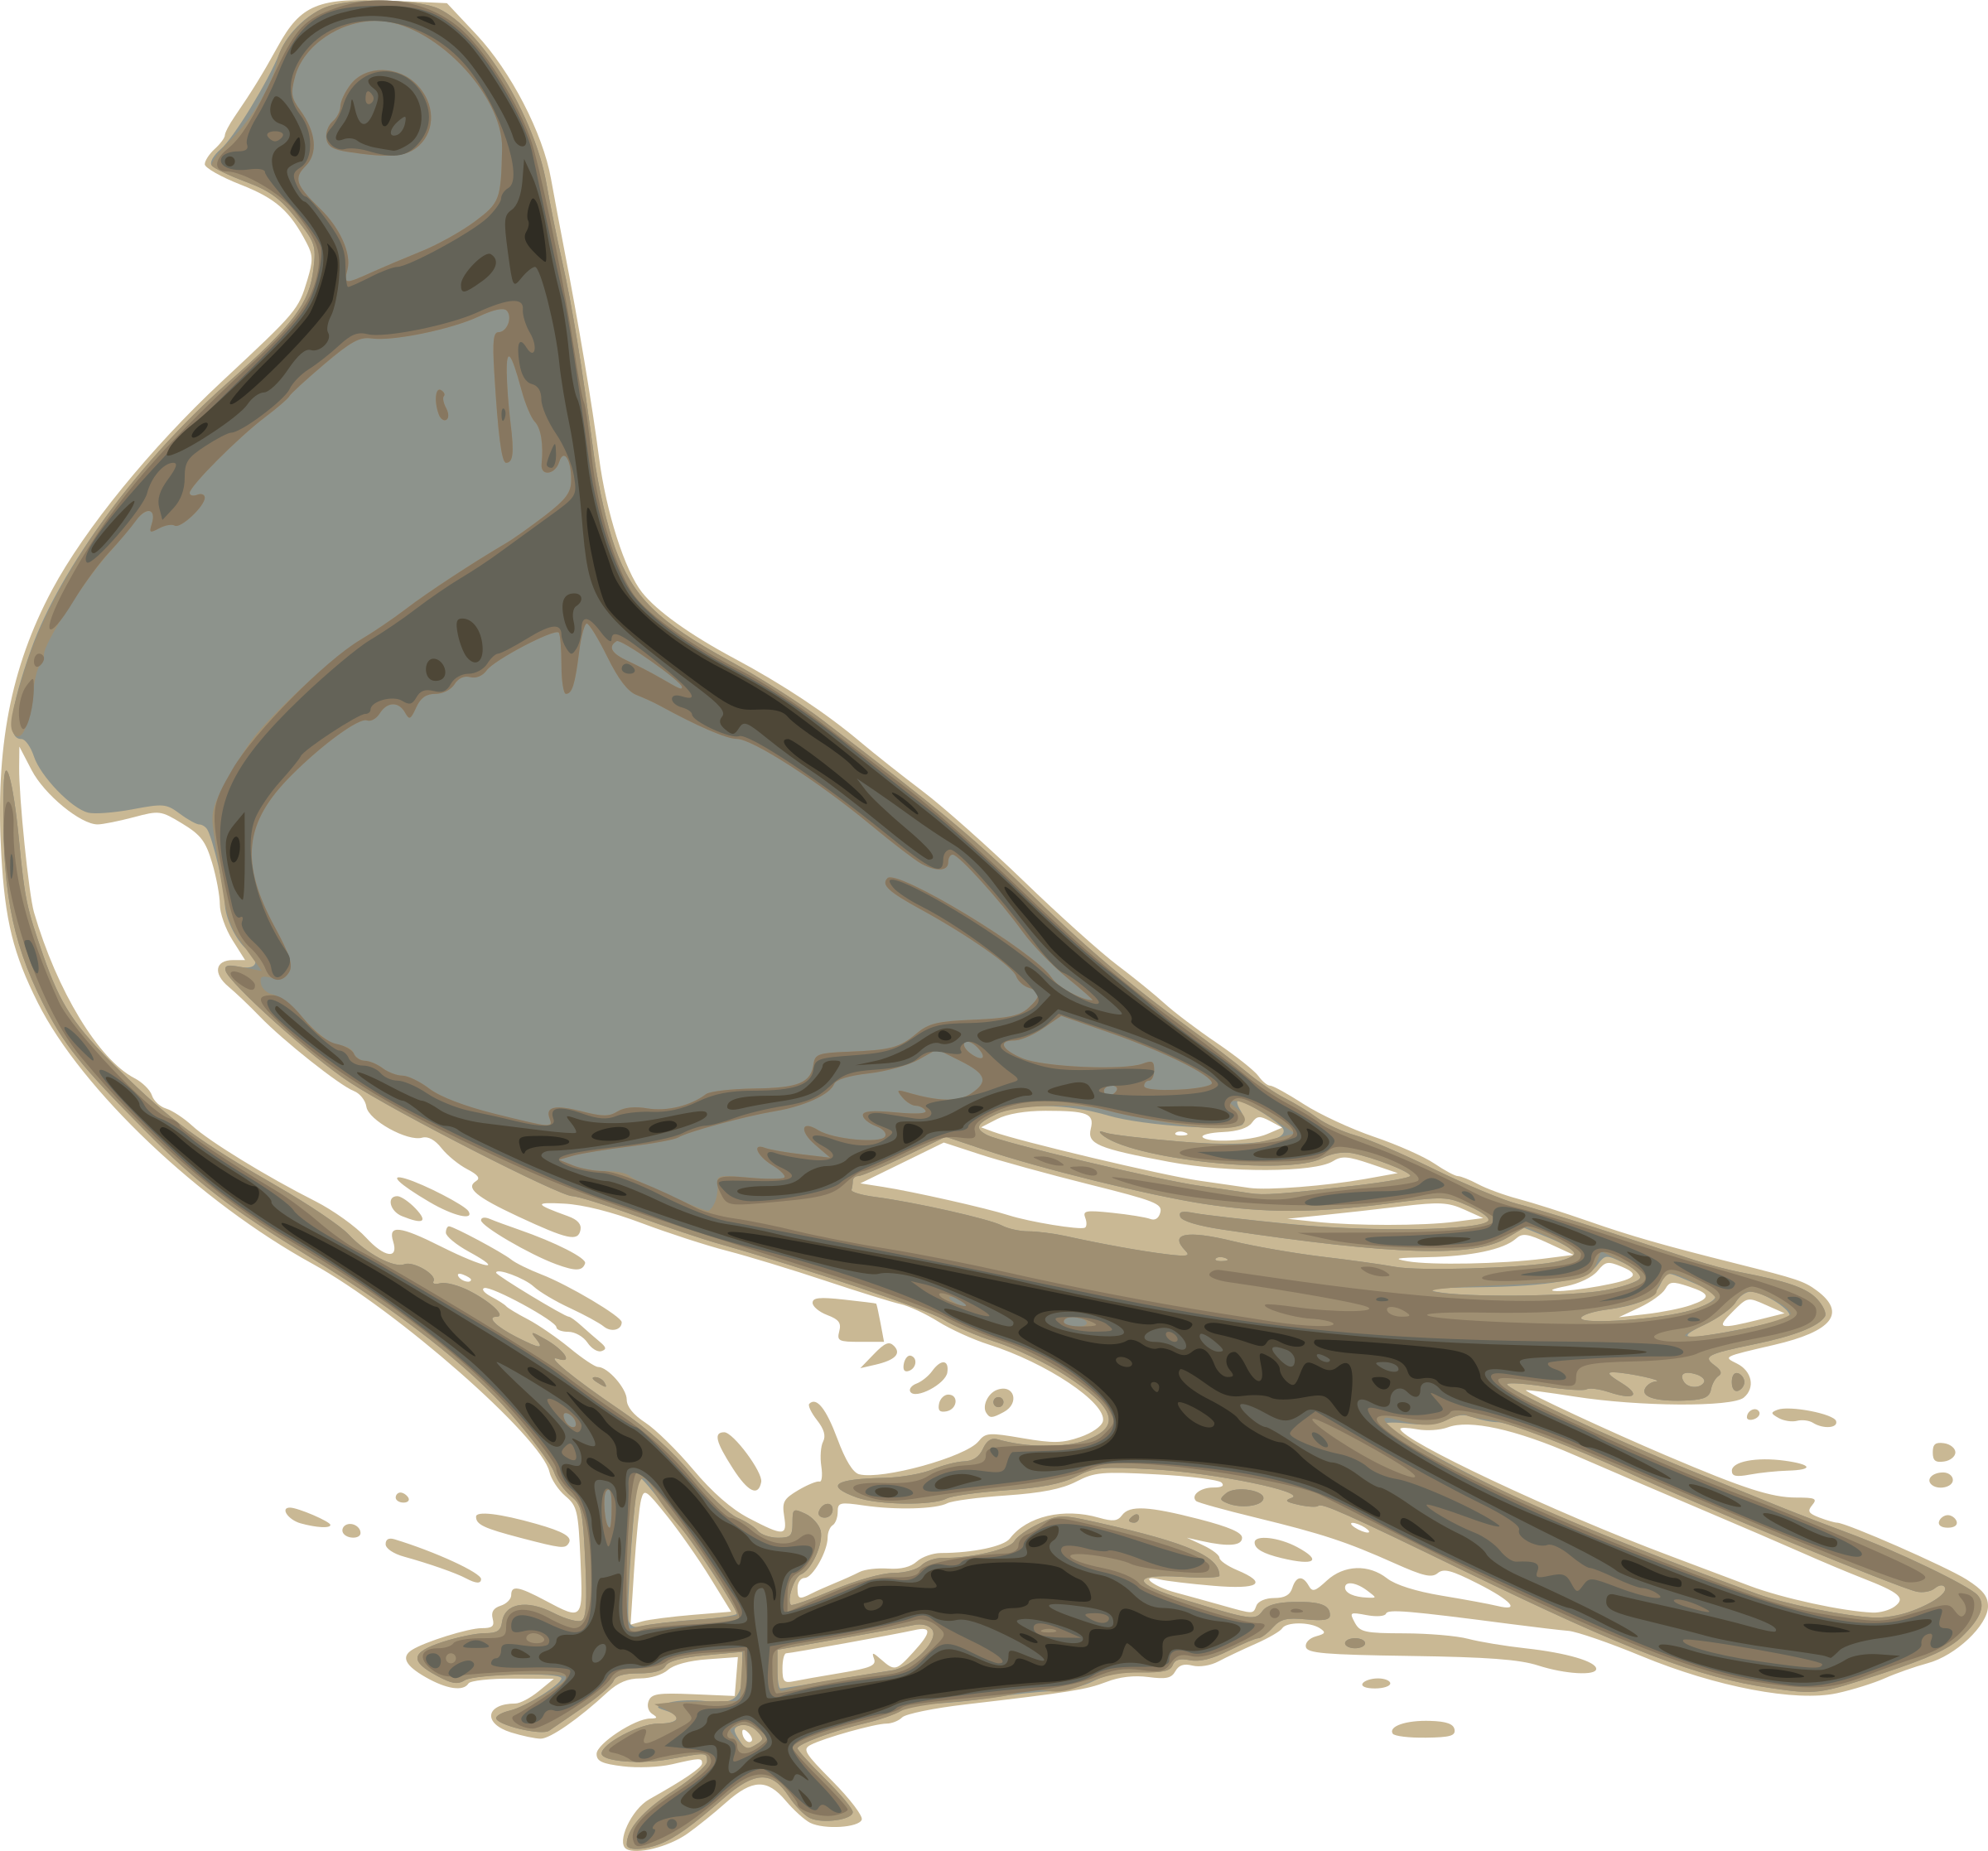 Illustration big image png. Pigeon clipart small dove